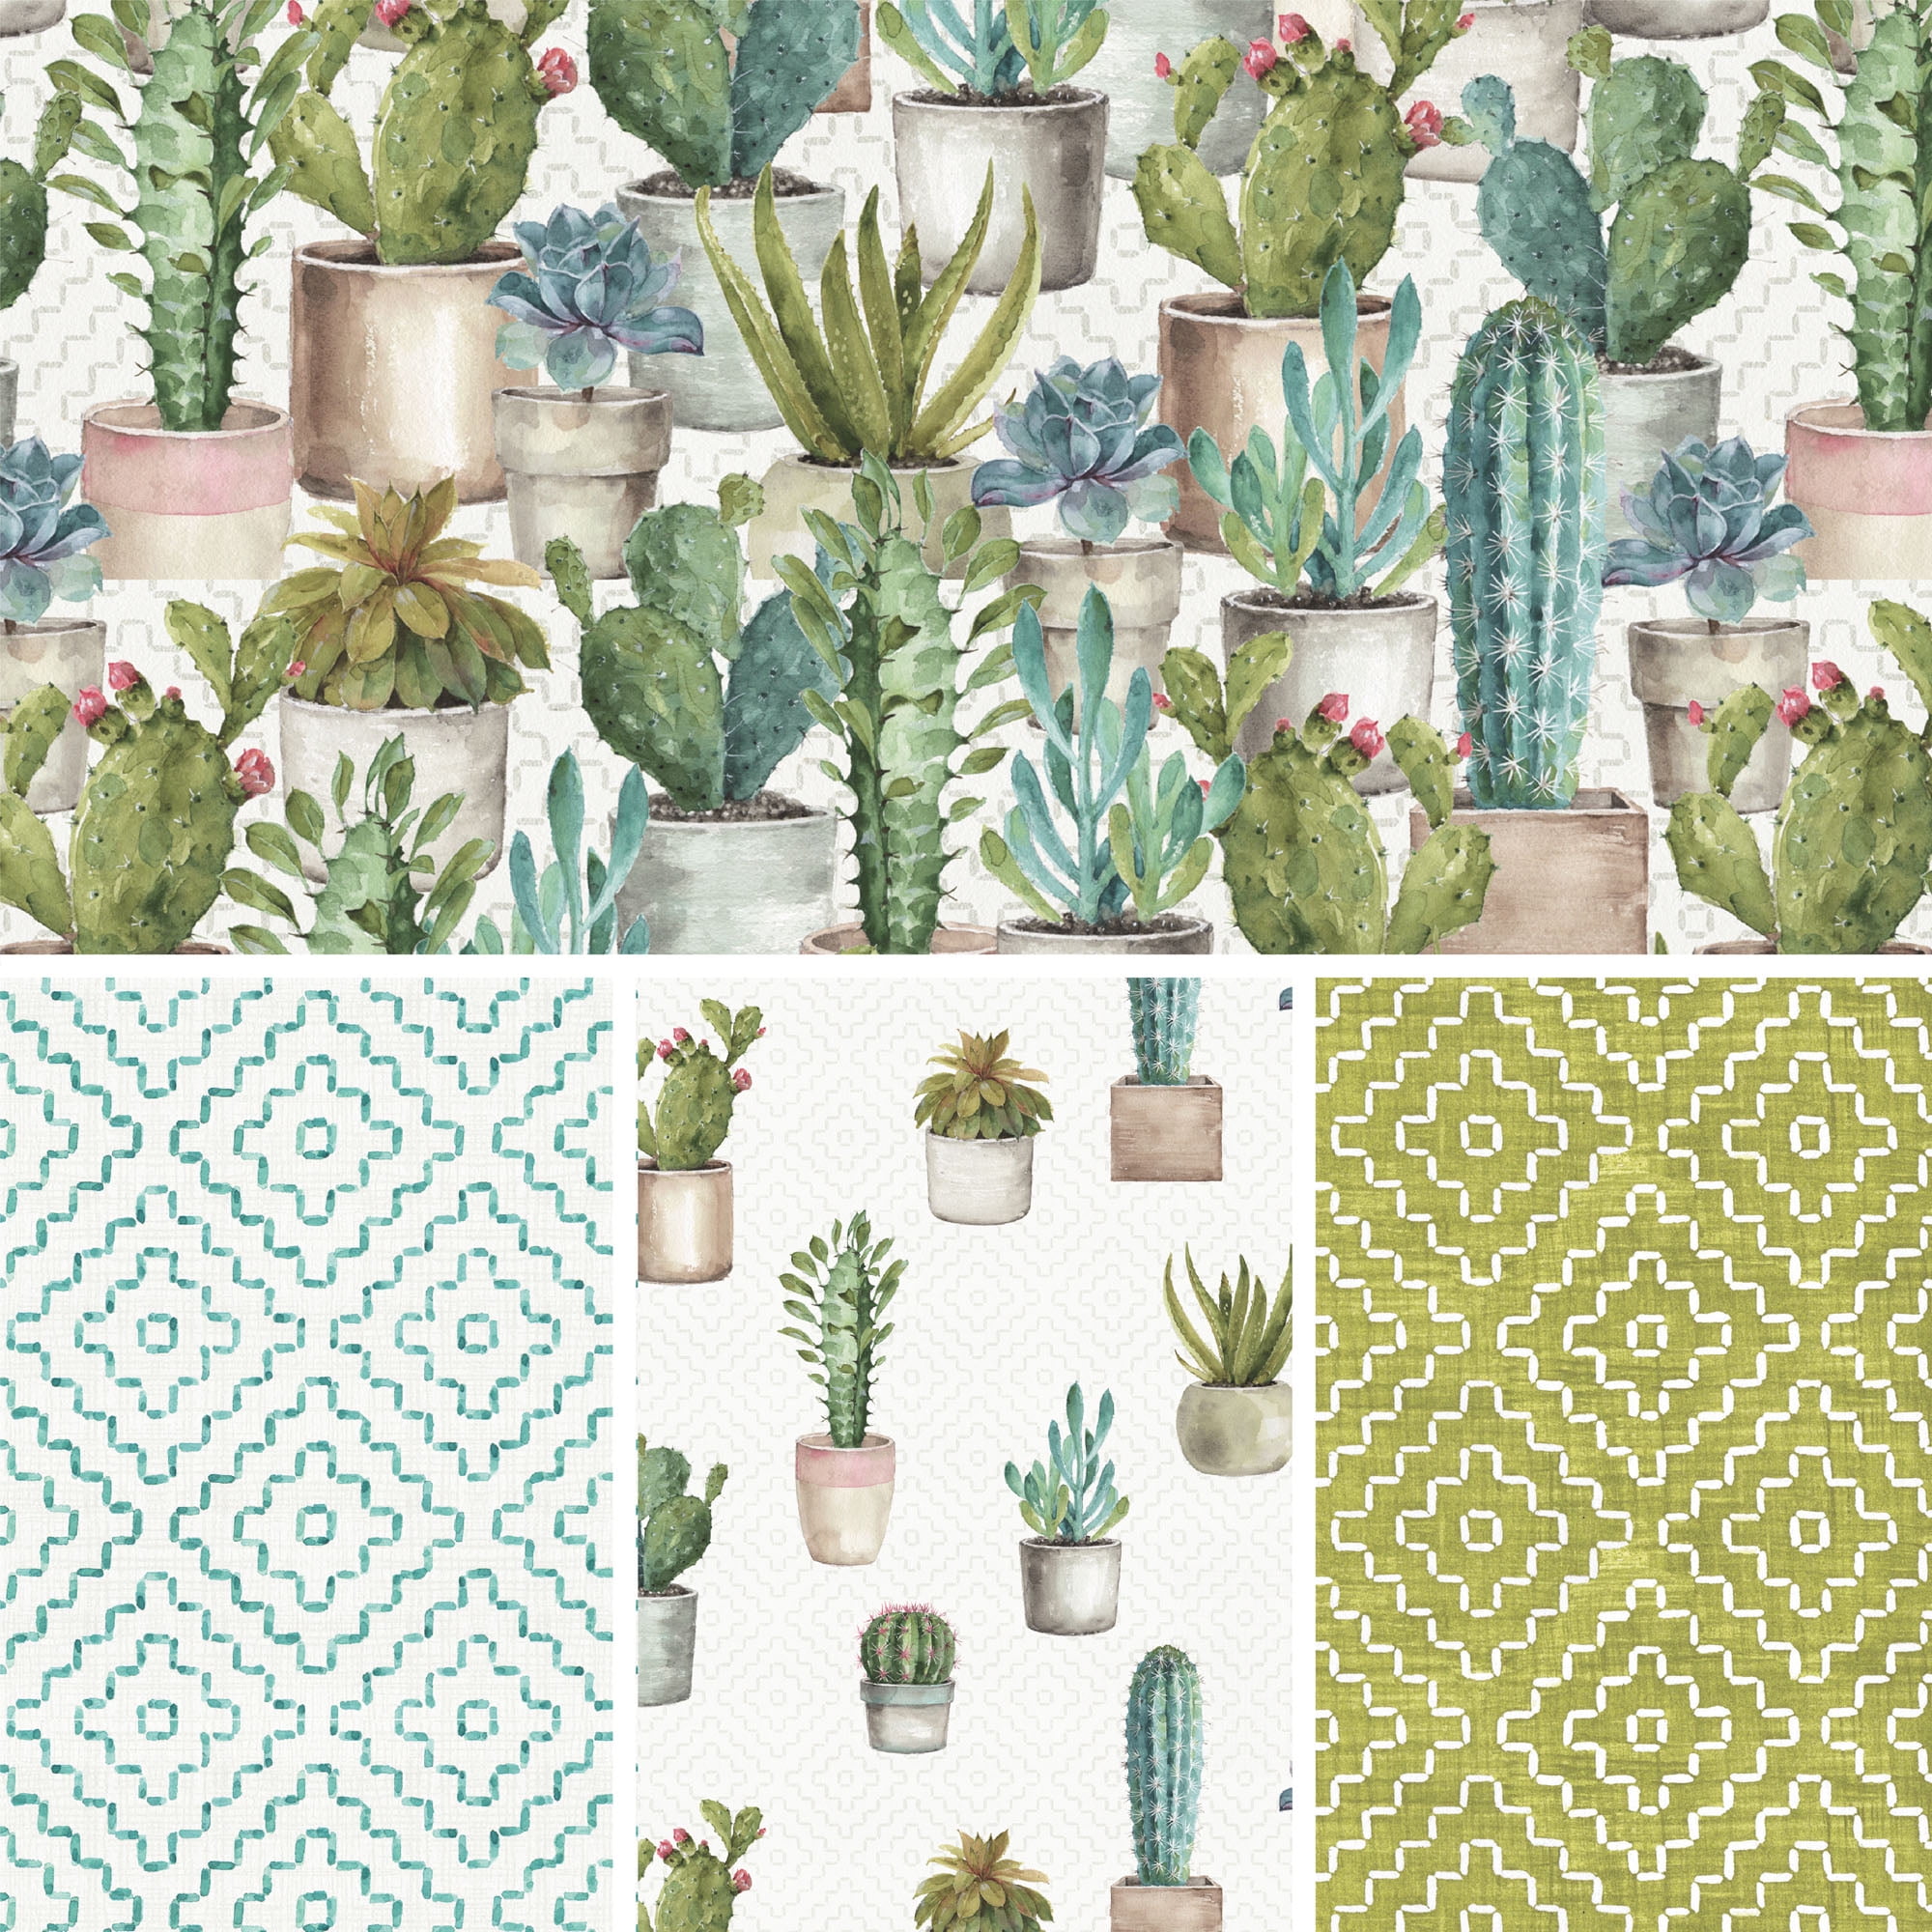  Cotton Fabric Cactus Fabric by The Yard 110cm Wide SY